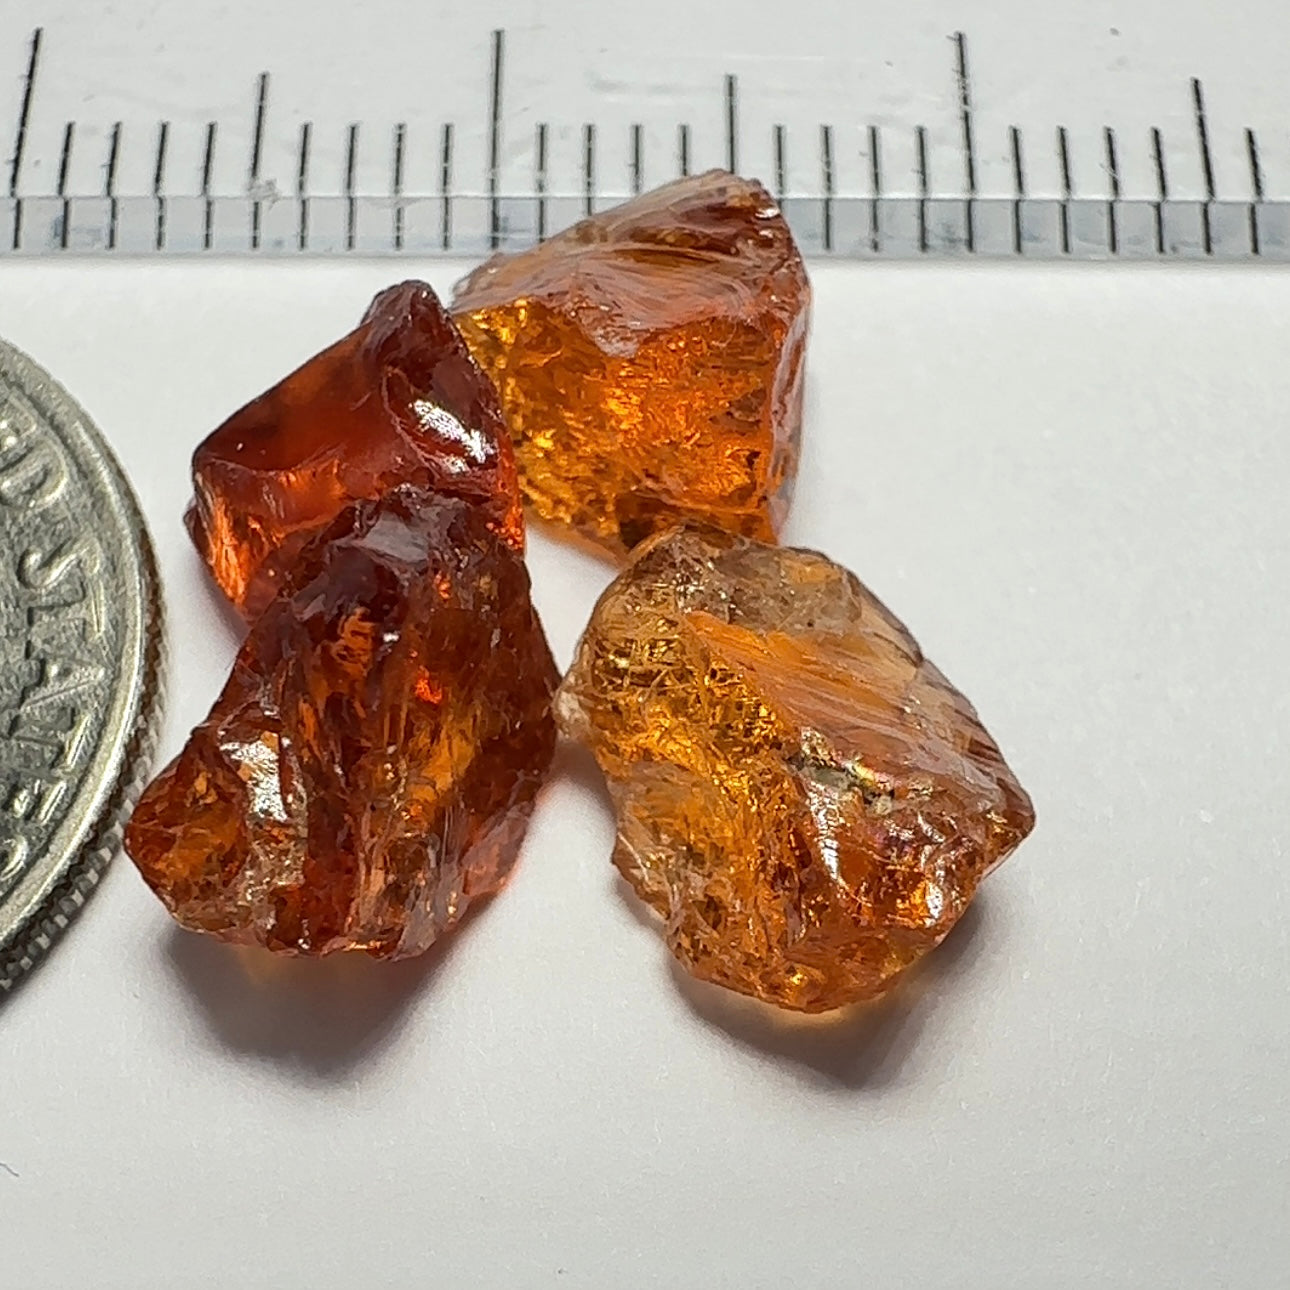 9.18ct Spessartite Carrot Colour Garnet Lot, Tanzania. Untreated Unheated. 2.16ct - 2.42ct. Slightly Included